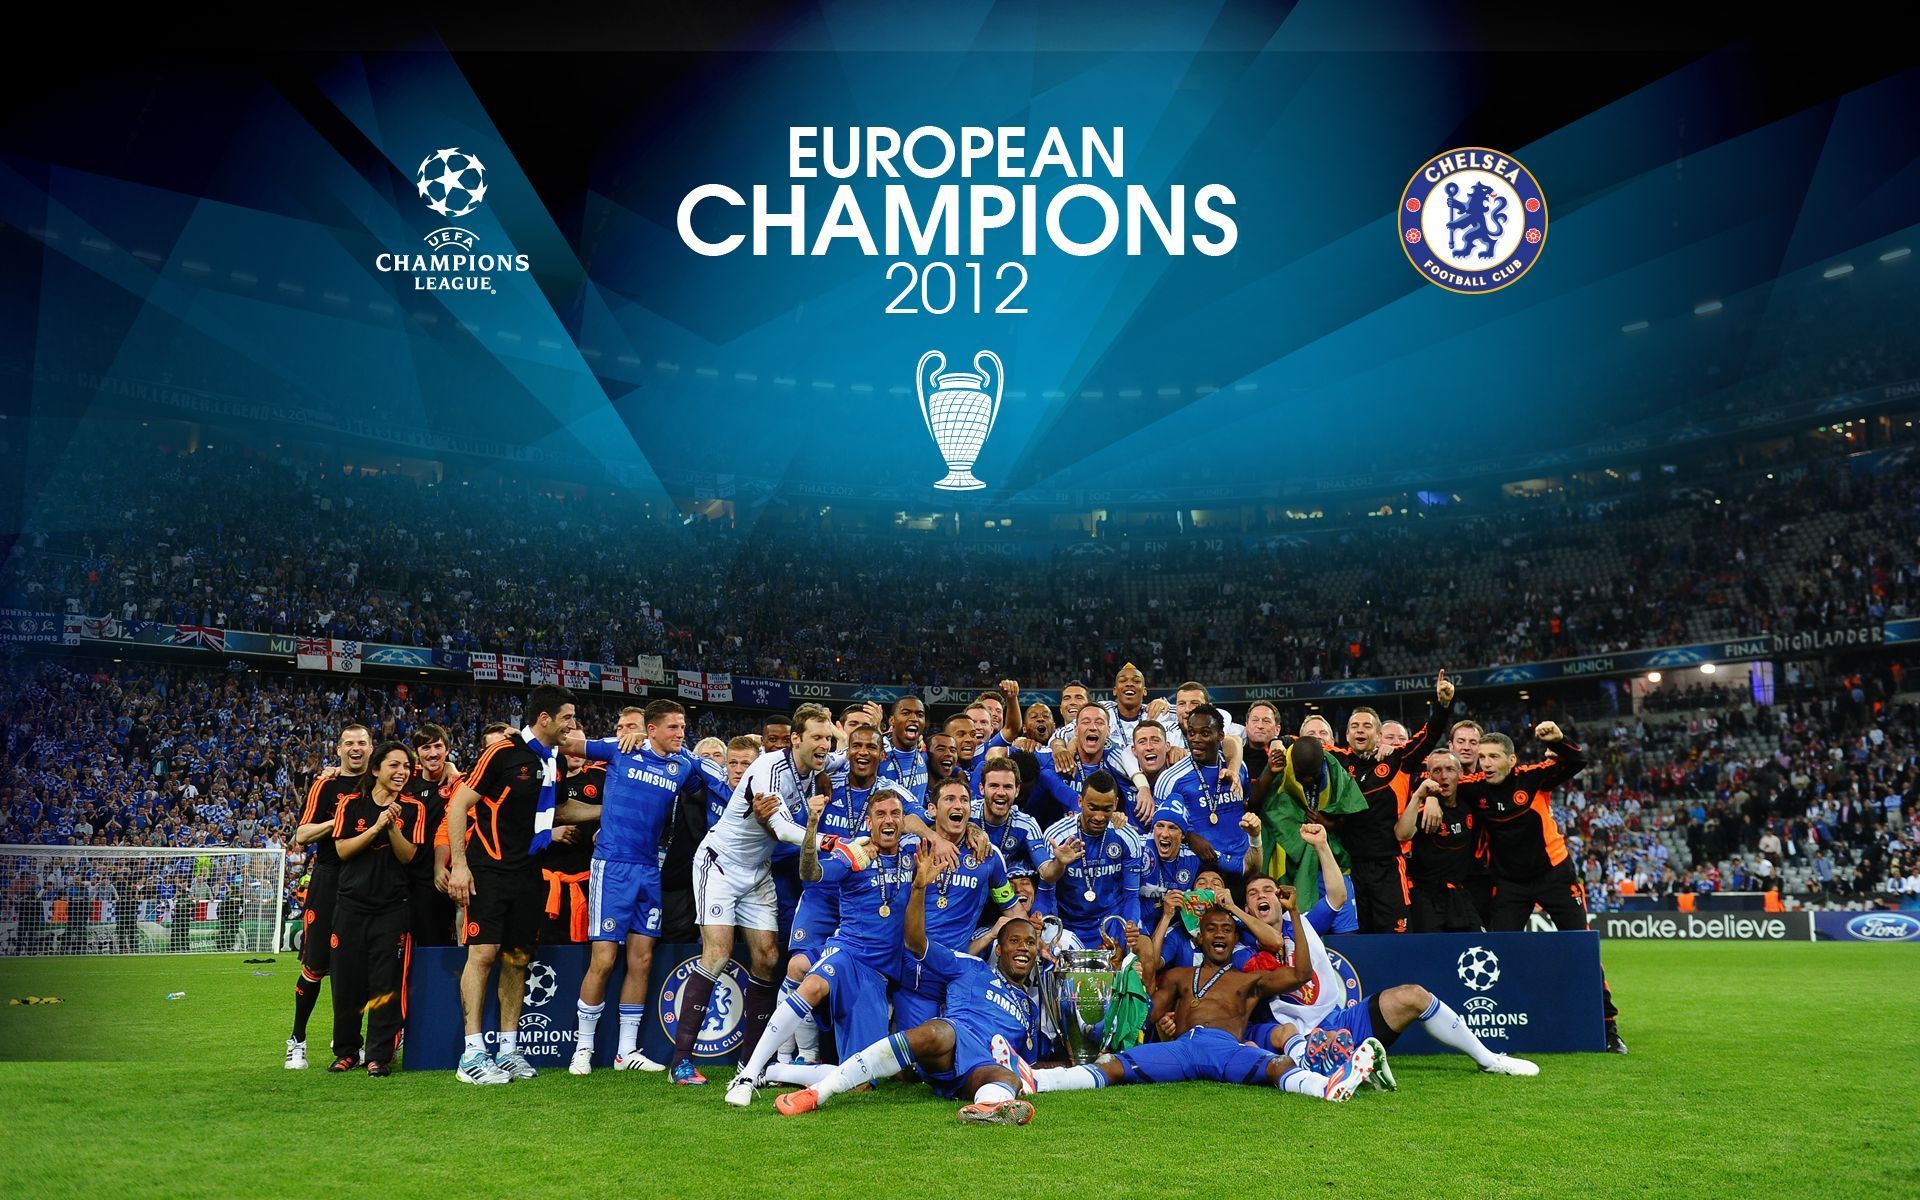 Chelsea fc wallpaper champions league | Valentines Day Quotes